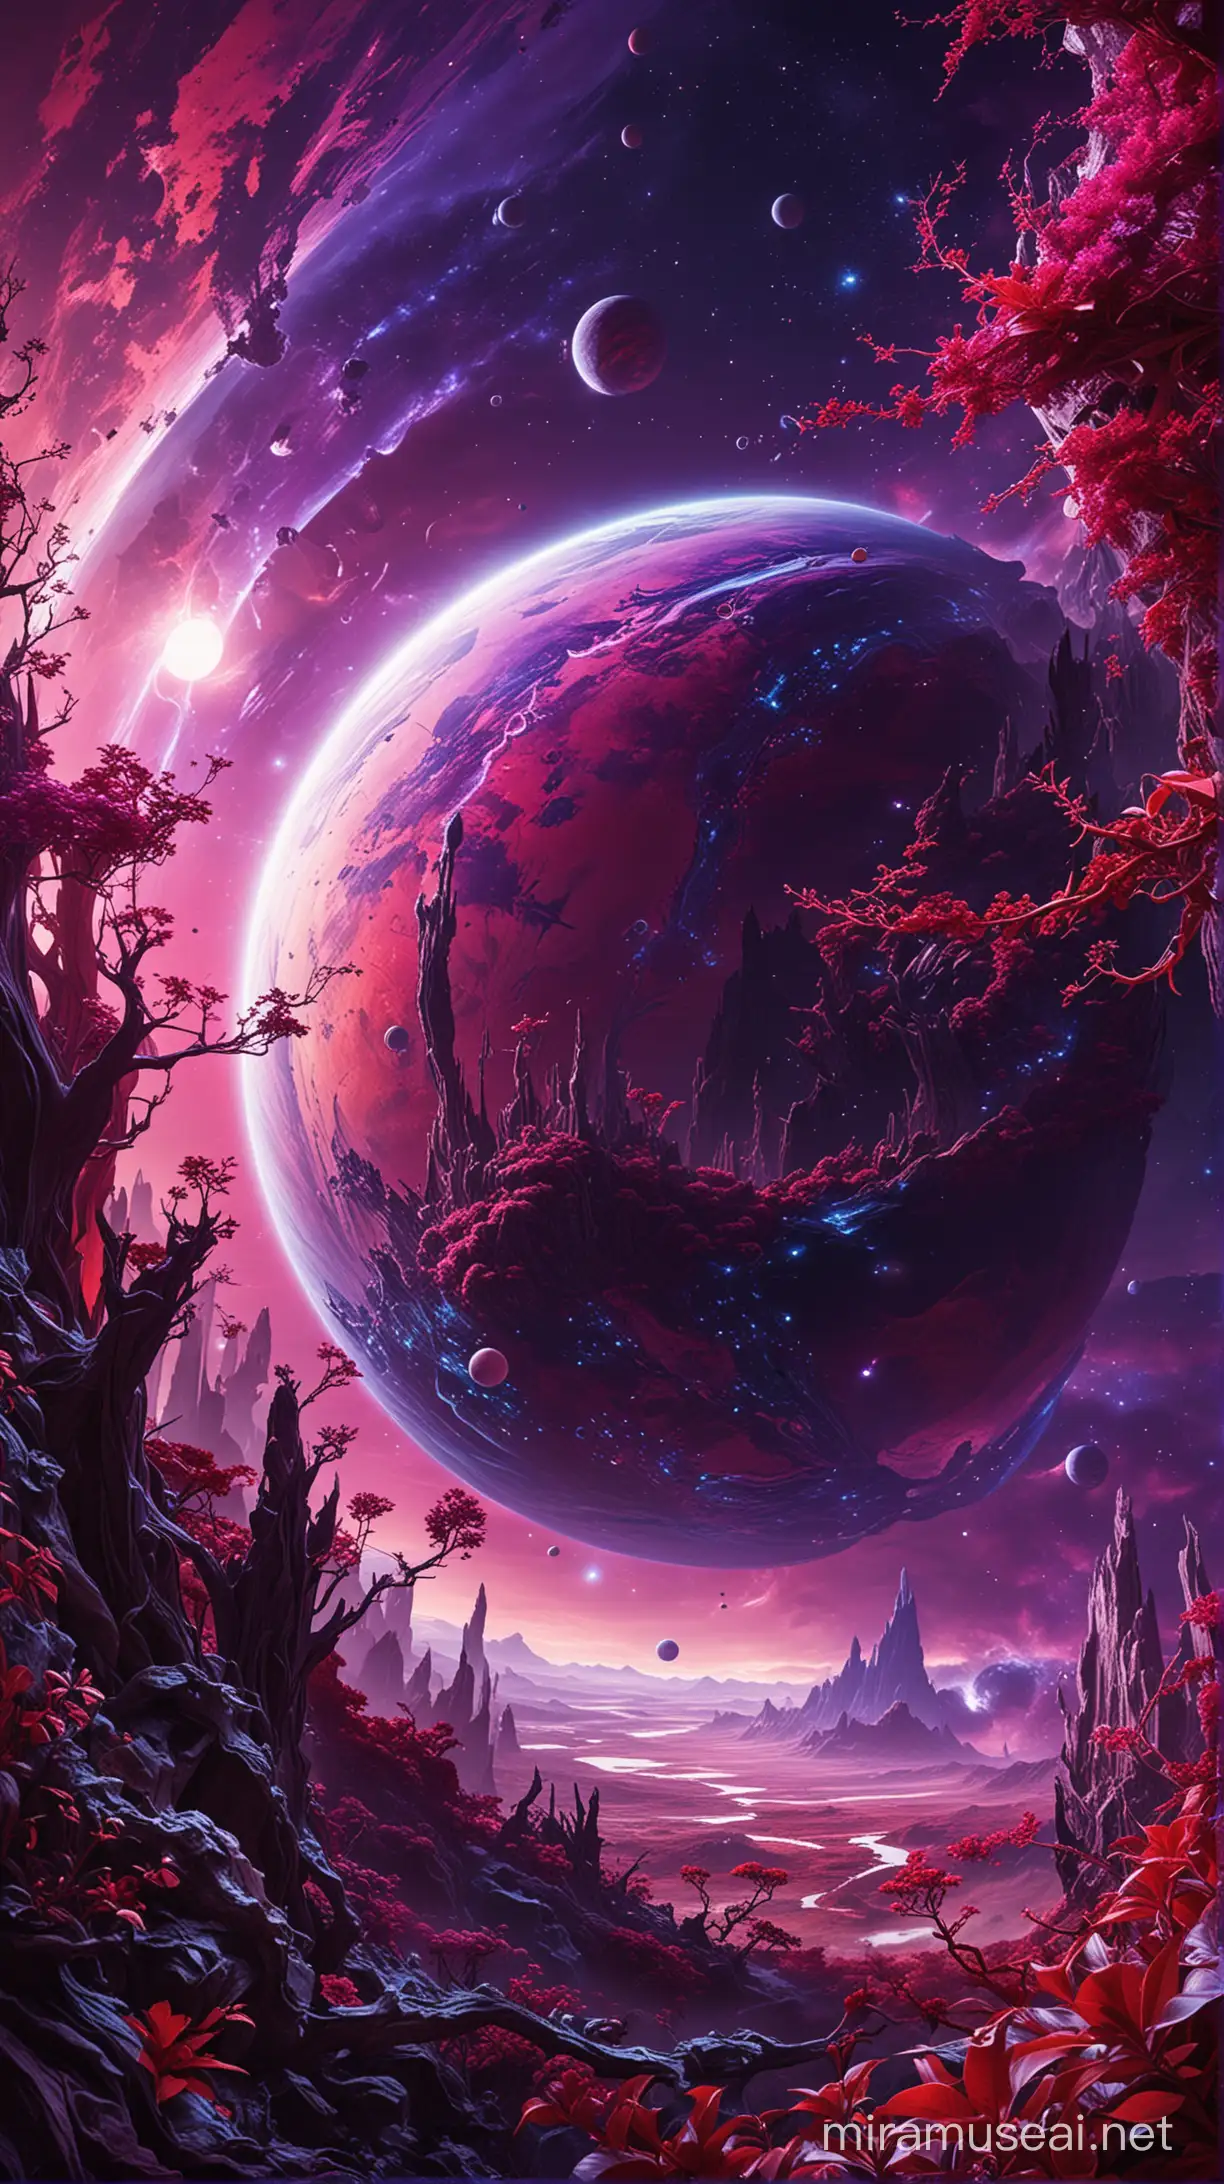 A breathtaking view of a planet nearly identical to Earth, but with vibrant purple oceans and crimson plant life.  Spaceships of fantastical design orbit the planet